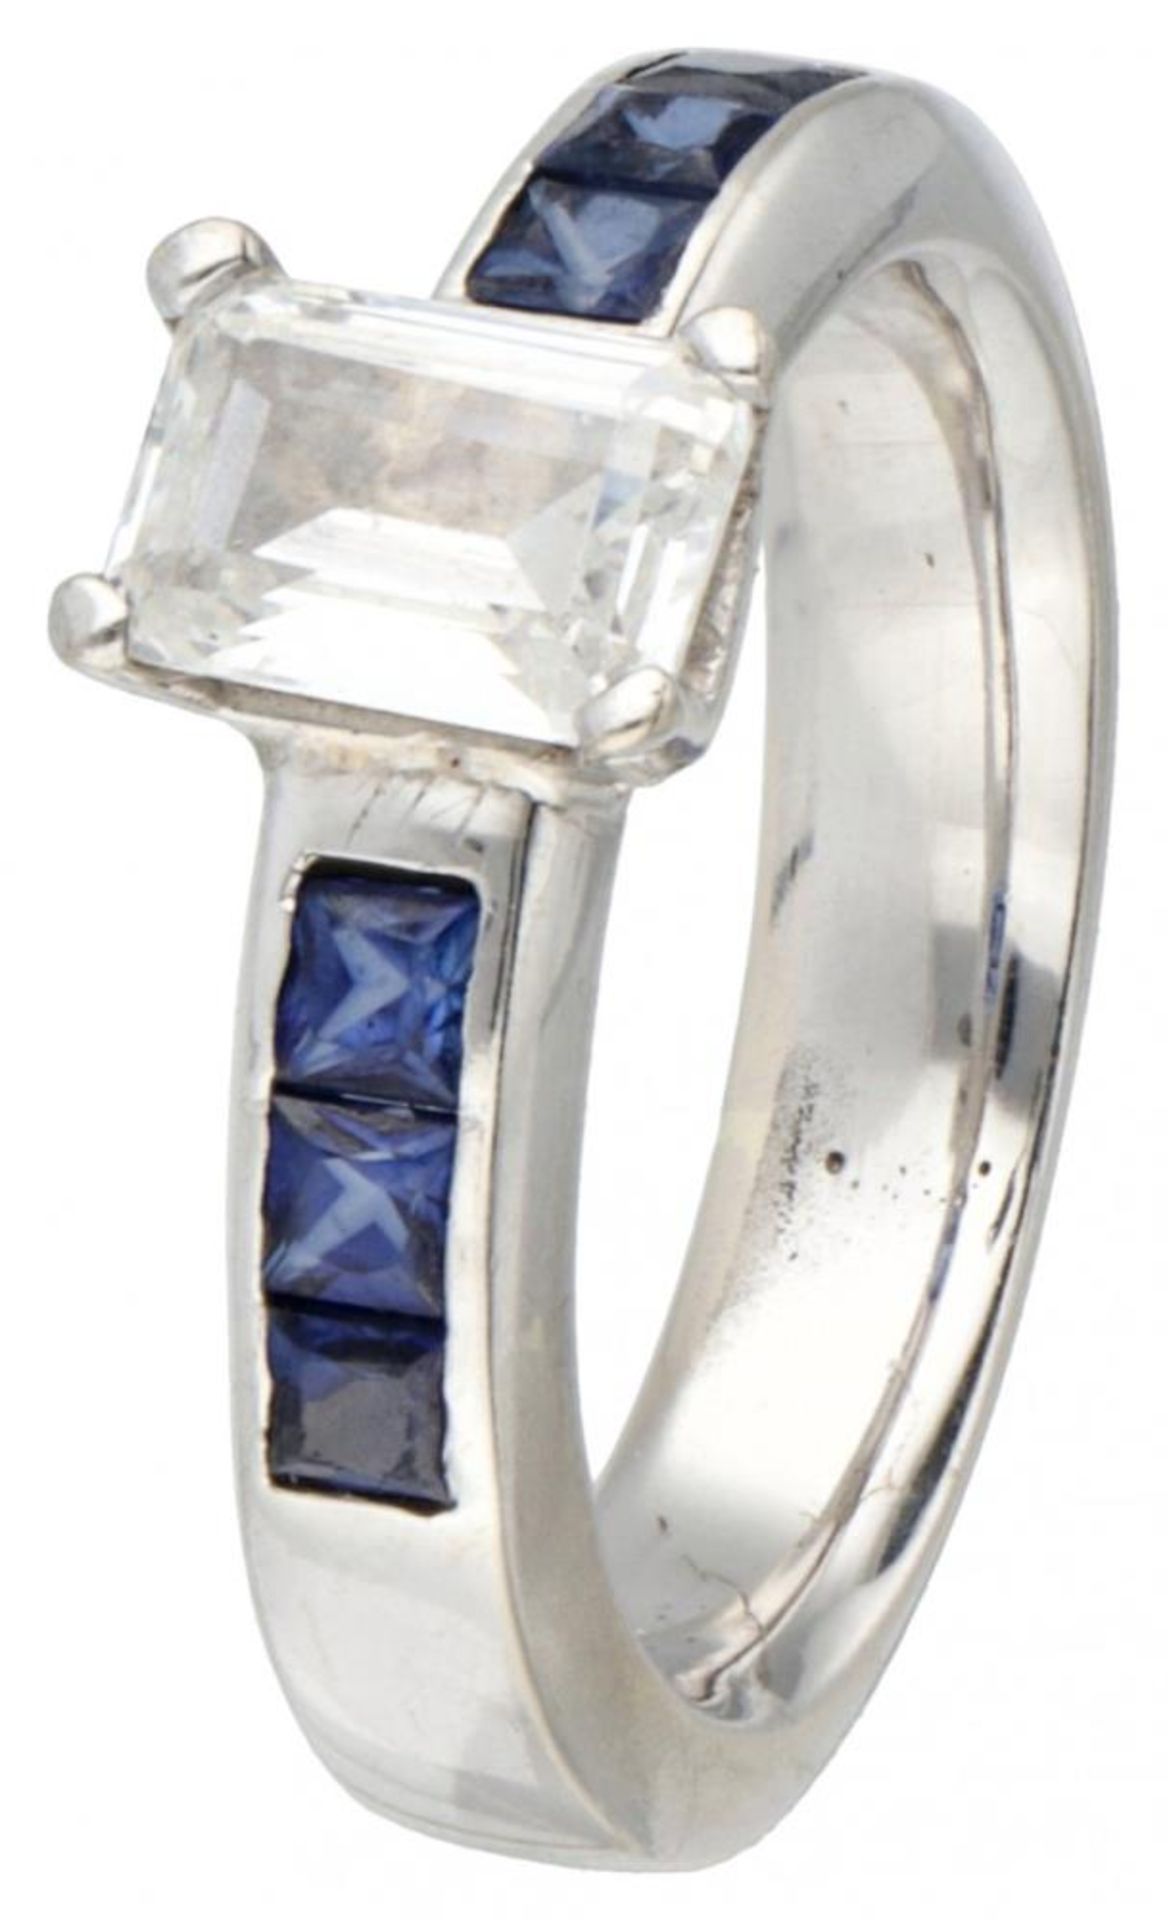 BLA 10K. White gold ring set with a cubic zirconia and sapphire.